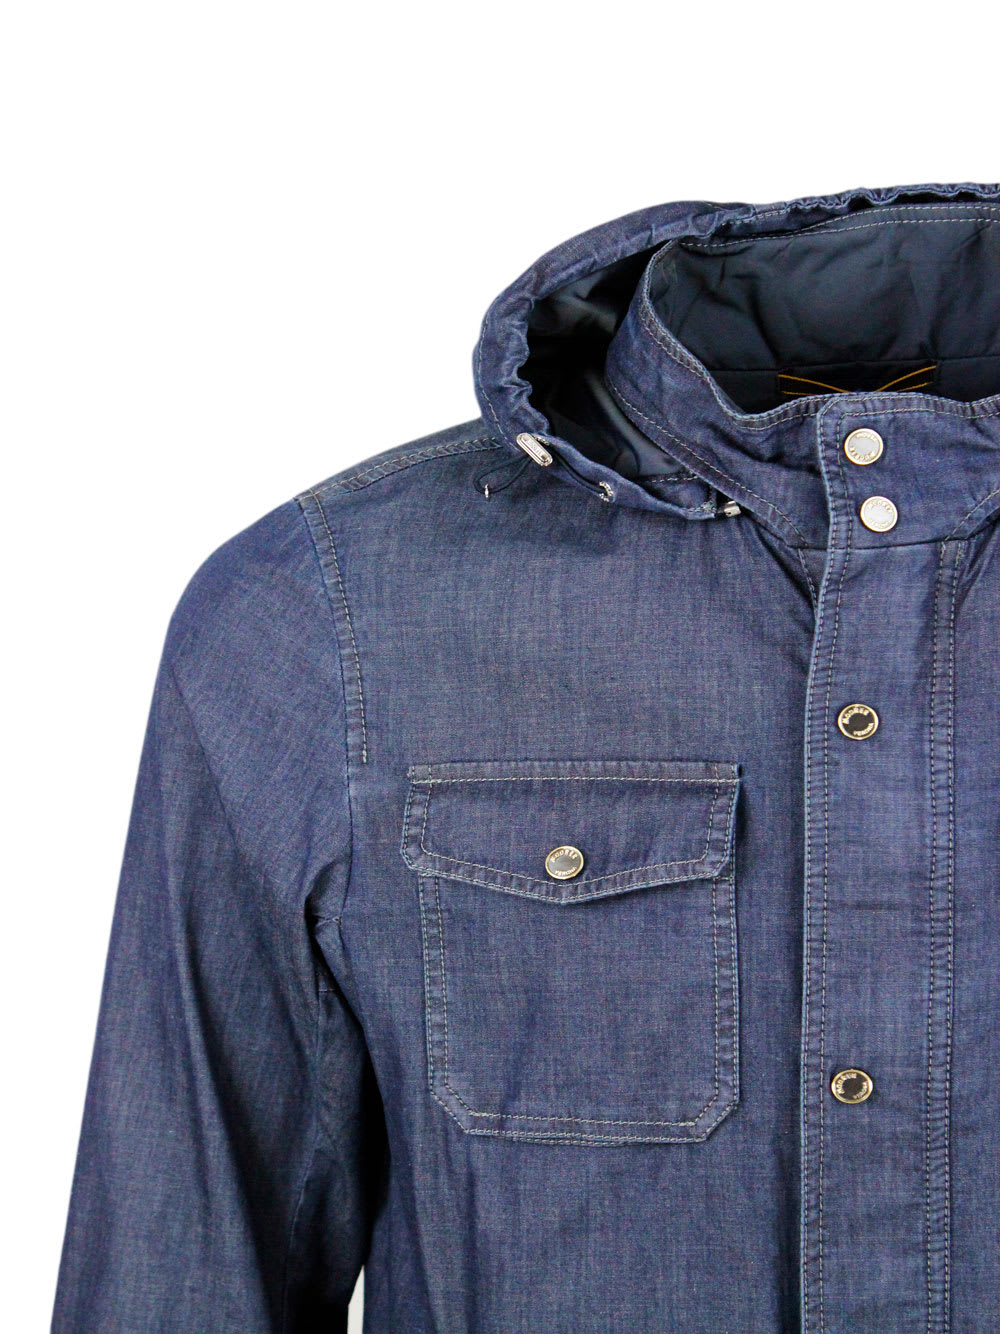 Shop Moorer Anorak Shirt Jacket From The Water Proof Line With 2 Umbrellas With Detachable Hood In Light And Sof In Denim